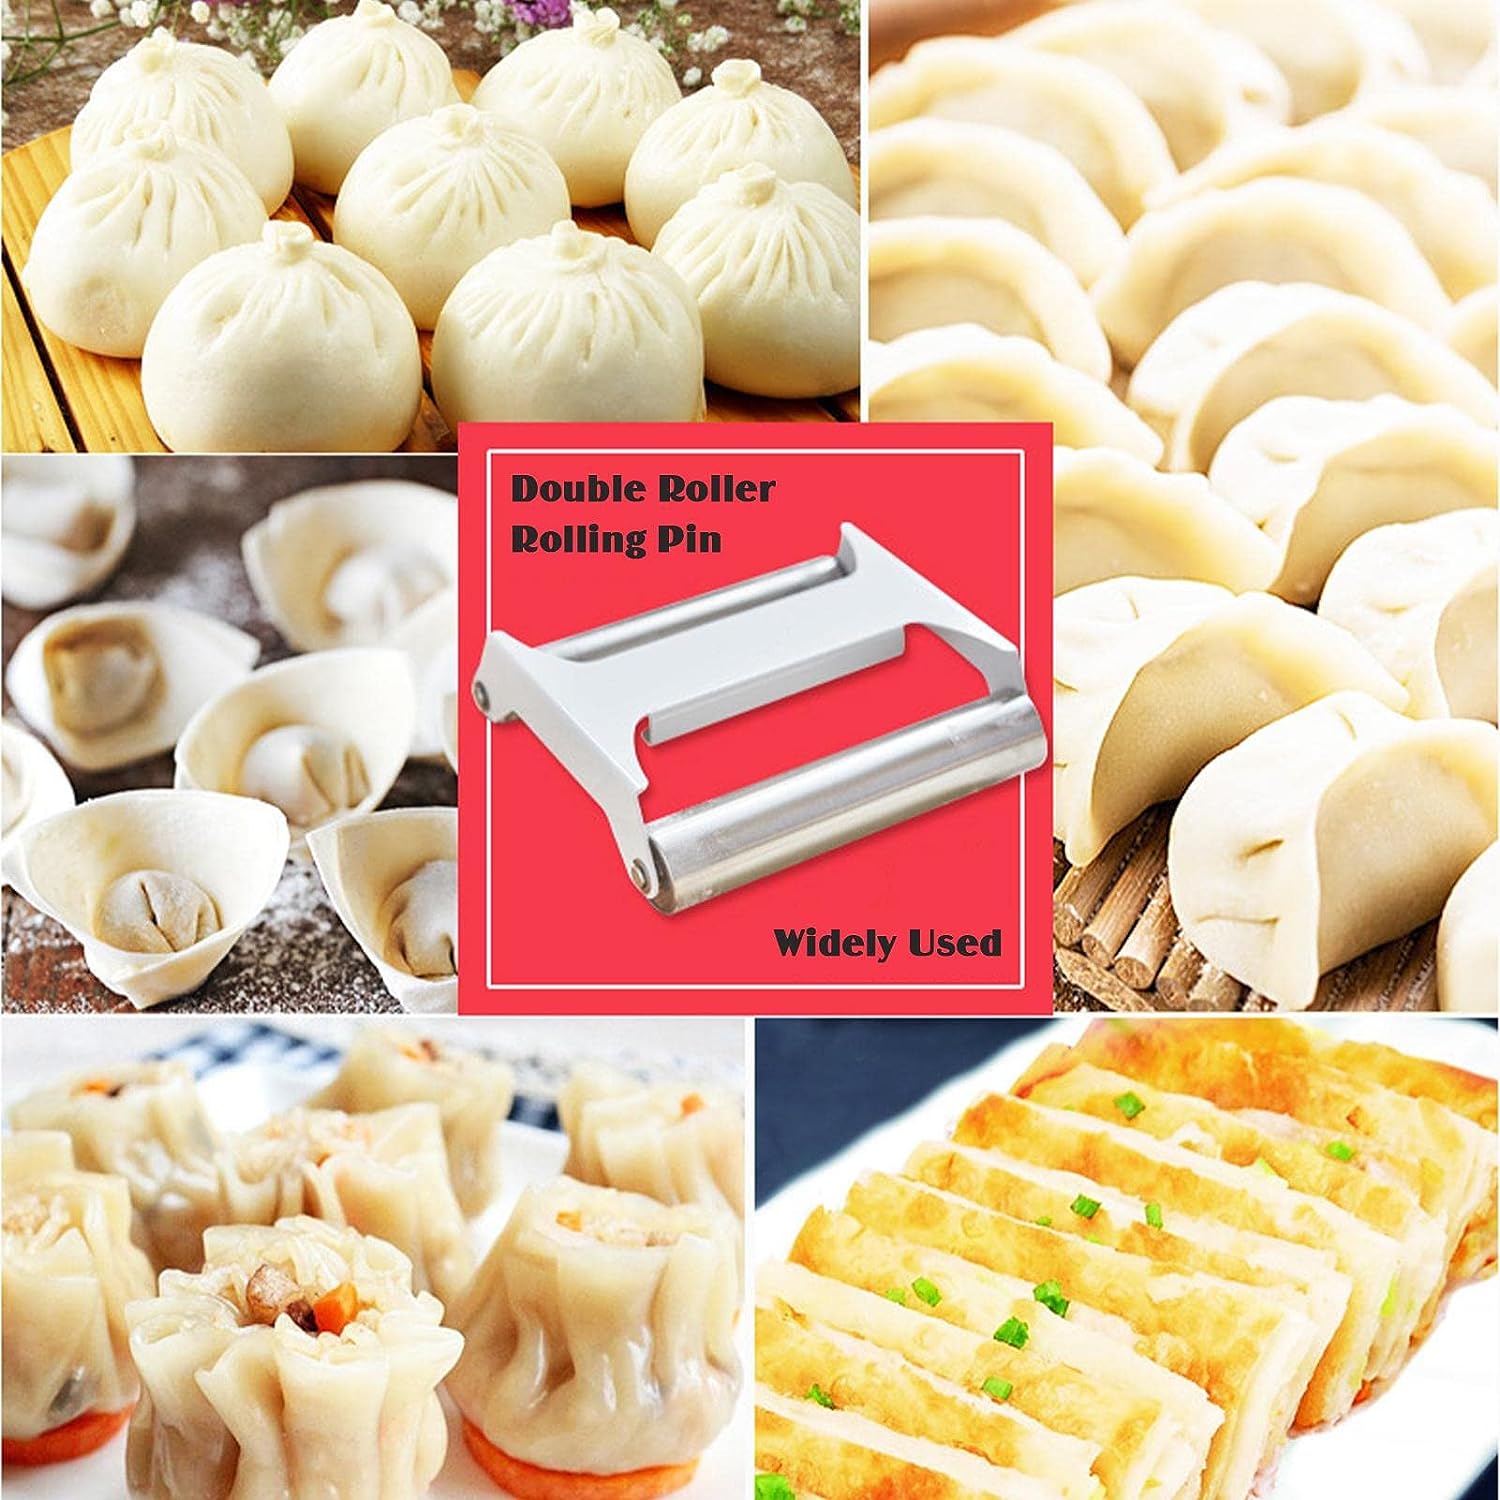 Double-Sided Stainless Steel Dough Roller for Baking - Widely used and versatile